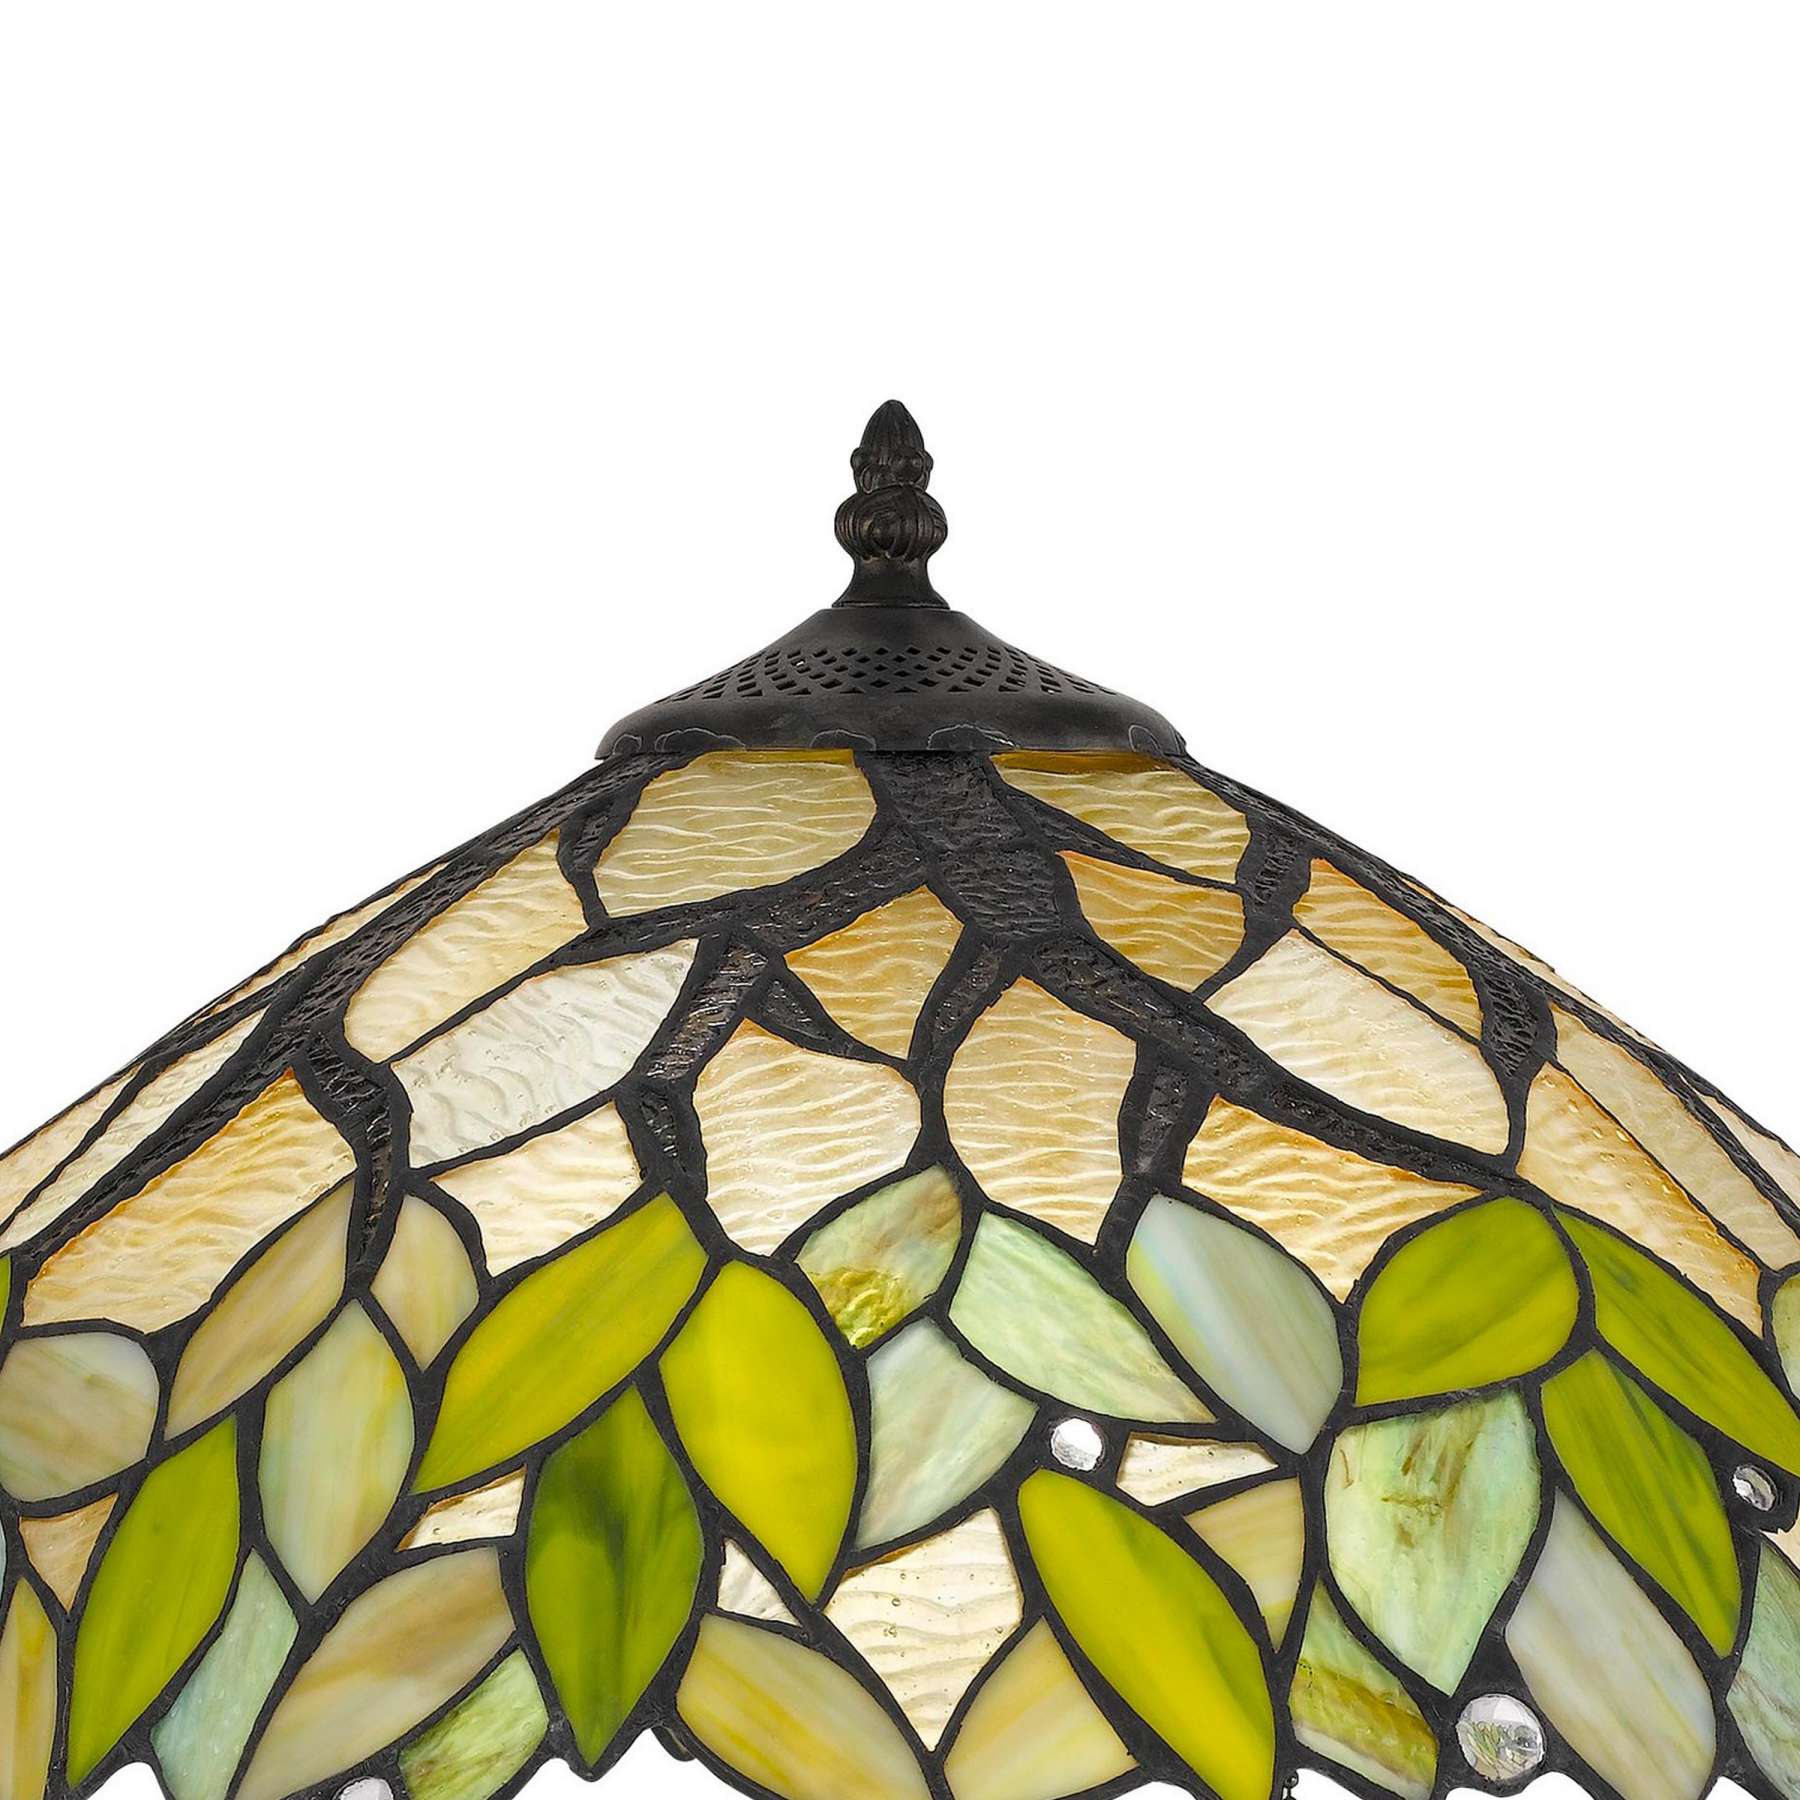 Benzara 2 Bulb Tiffany Table Lamp With Leaf Design Glass Shade, Multicolor By Benzara Table Lamps BM224791